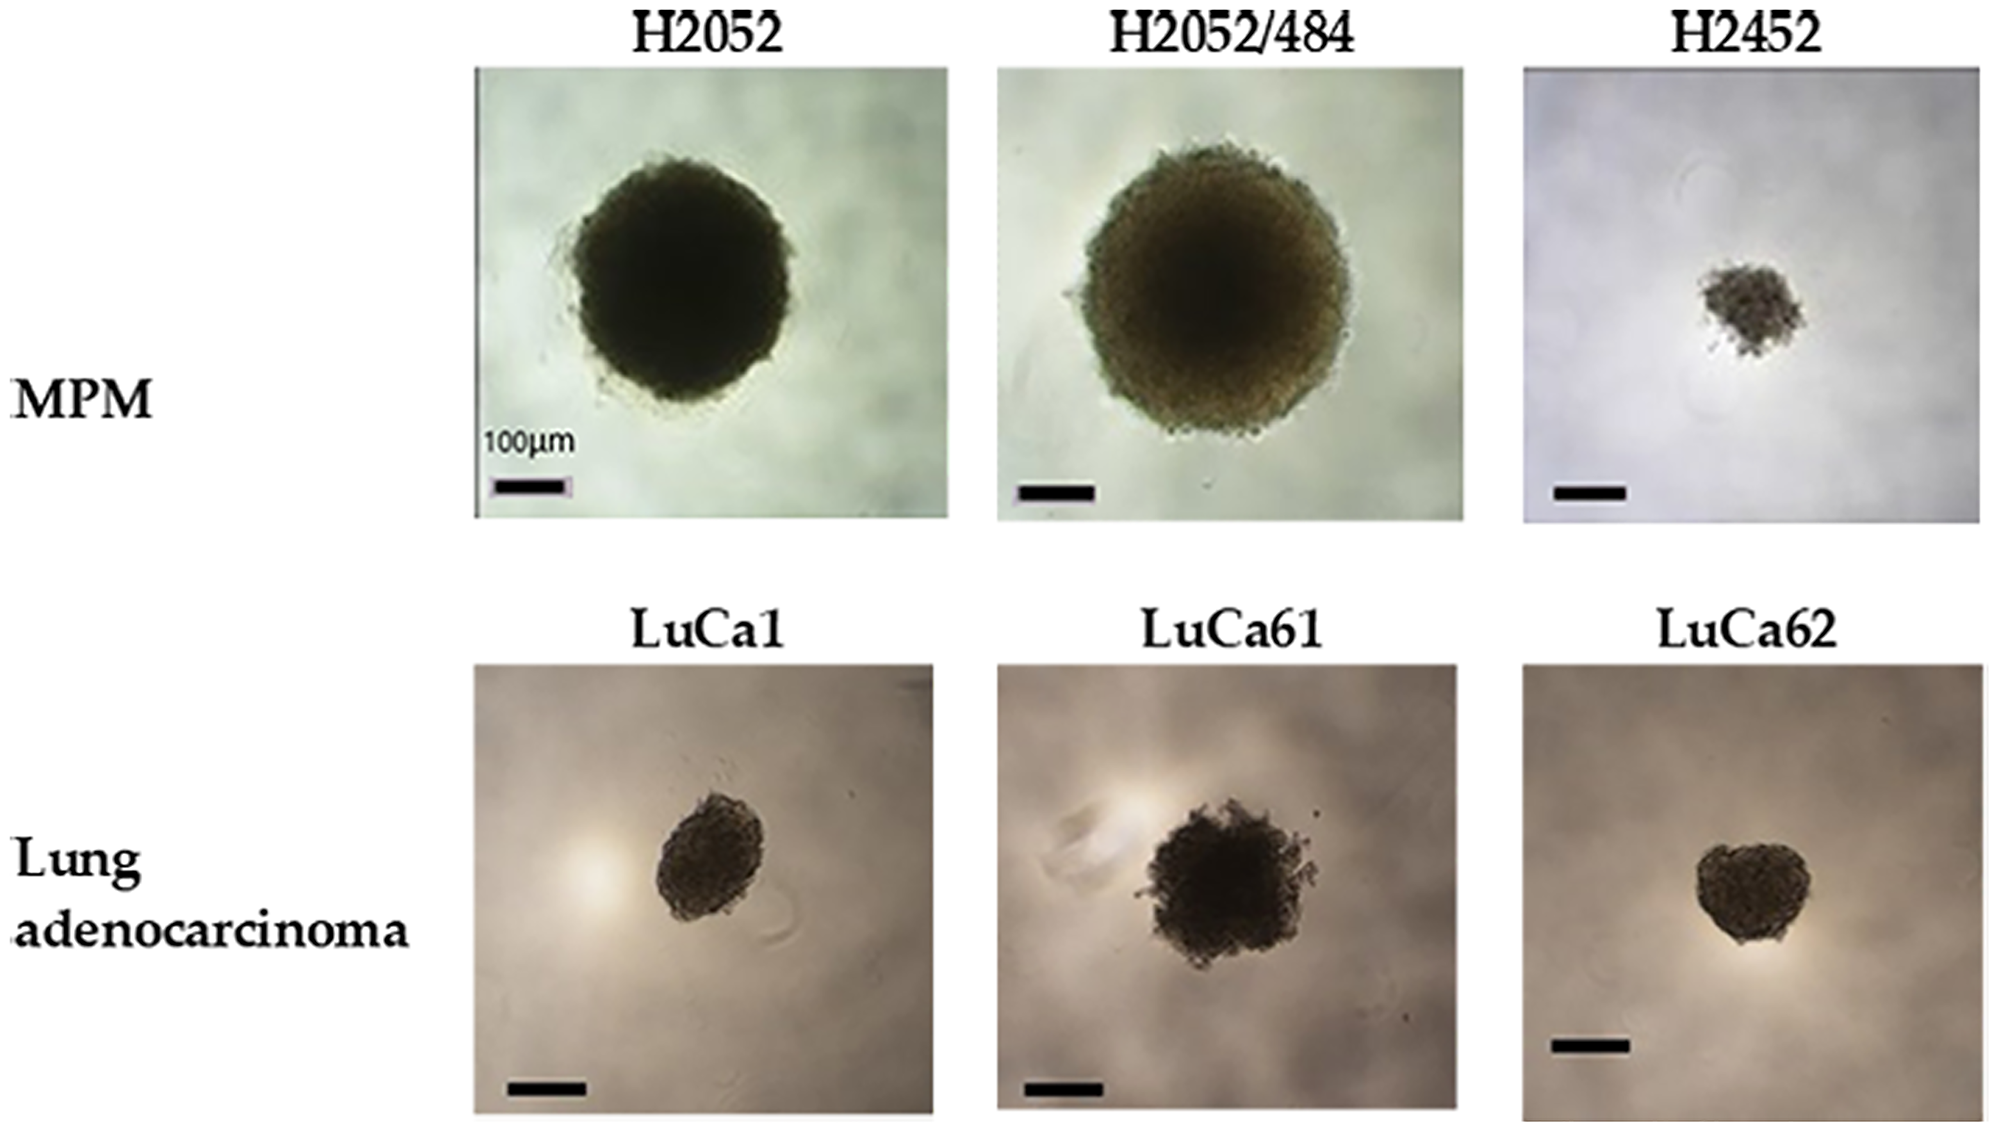 Multicellular spheroids were generated from MPM and lung adenocarcinoma cell populations.